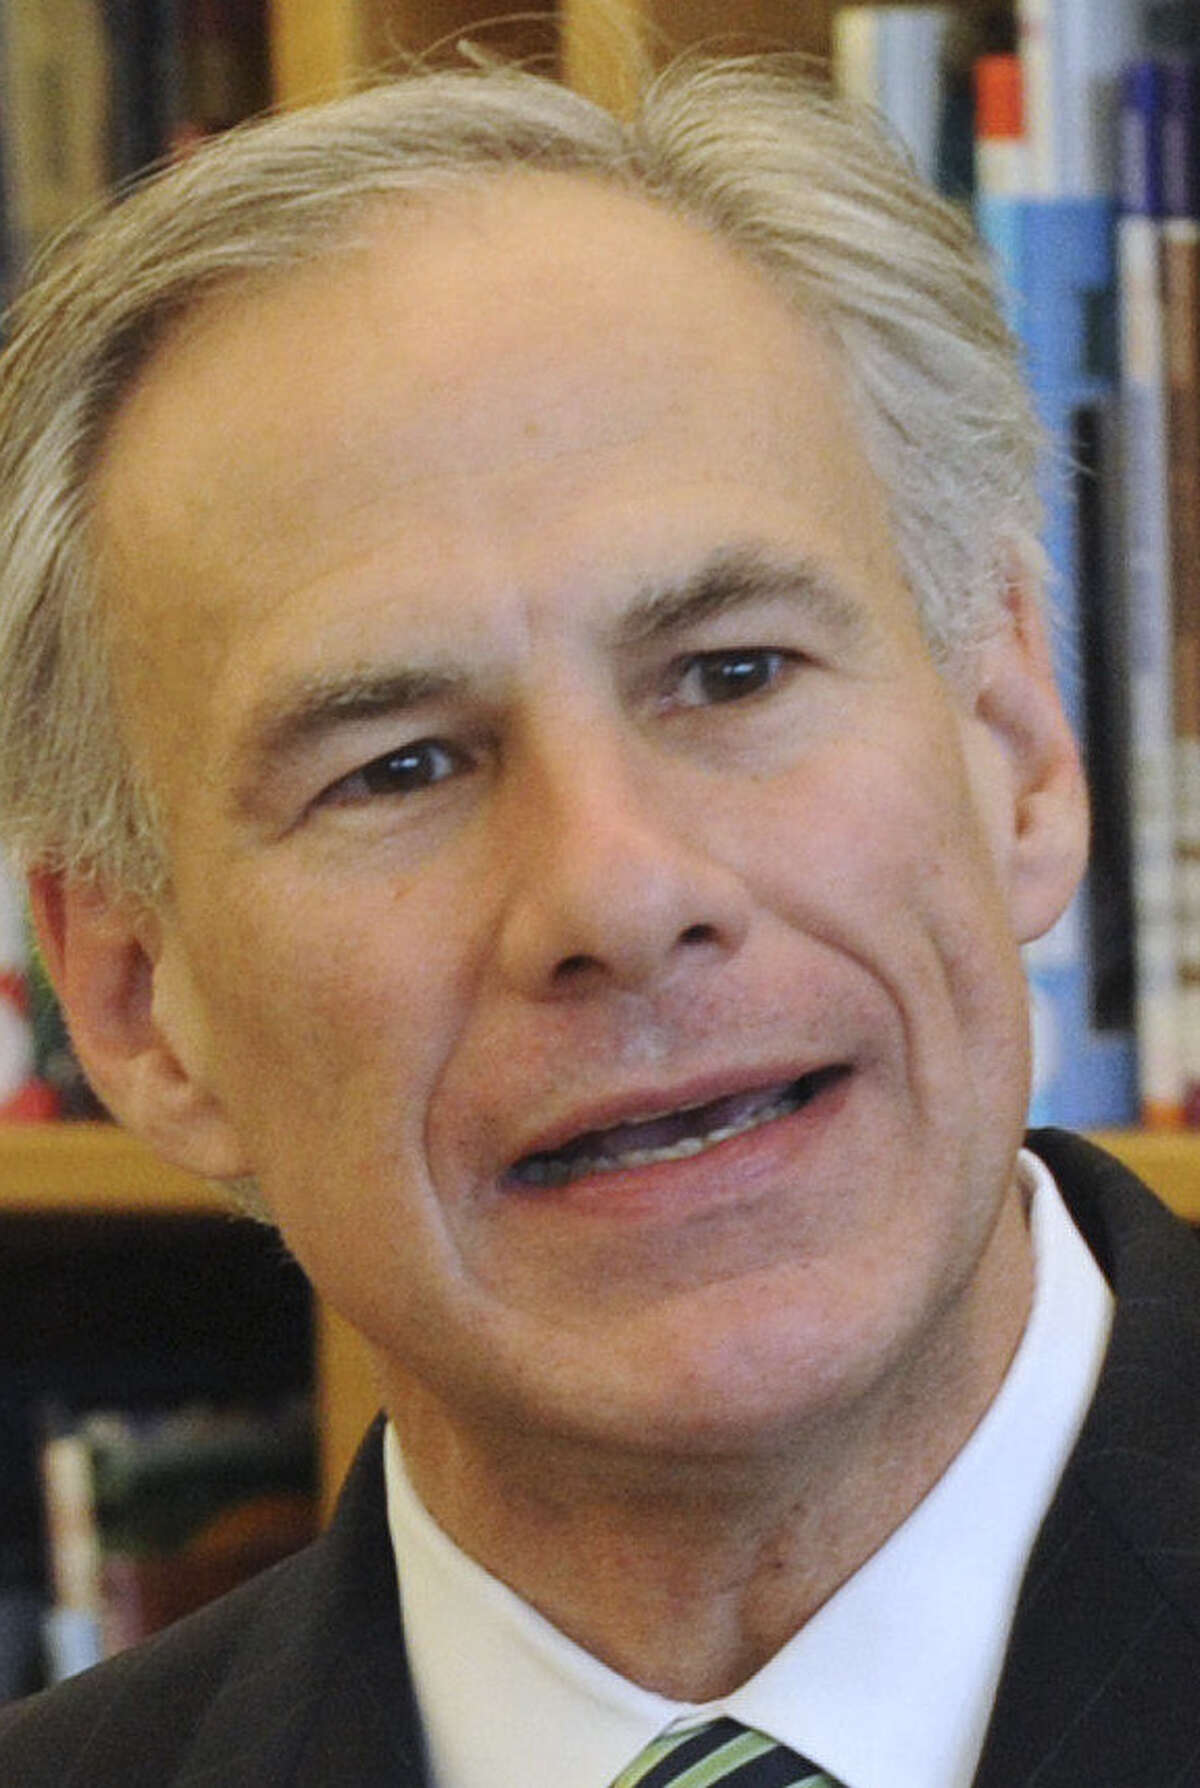 Republican Greg Abbott's campaign defended his role with regard to the Cancer Prevention and Research Institute, citing help for a probe.